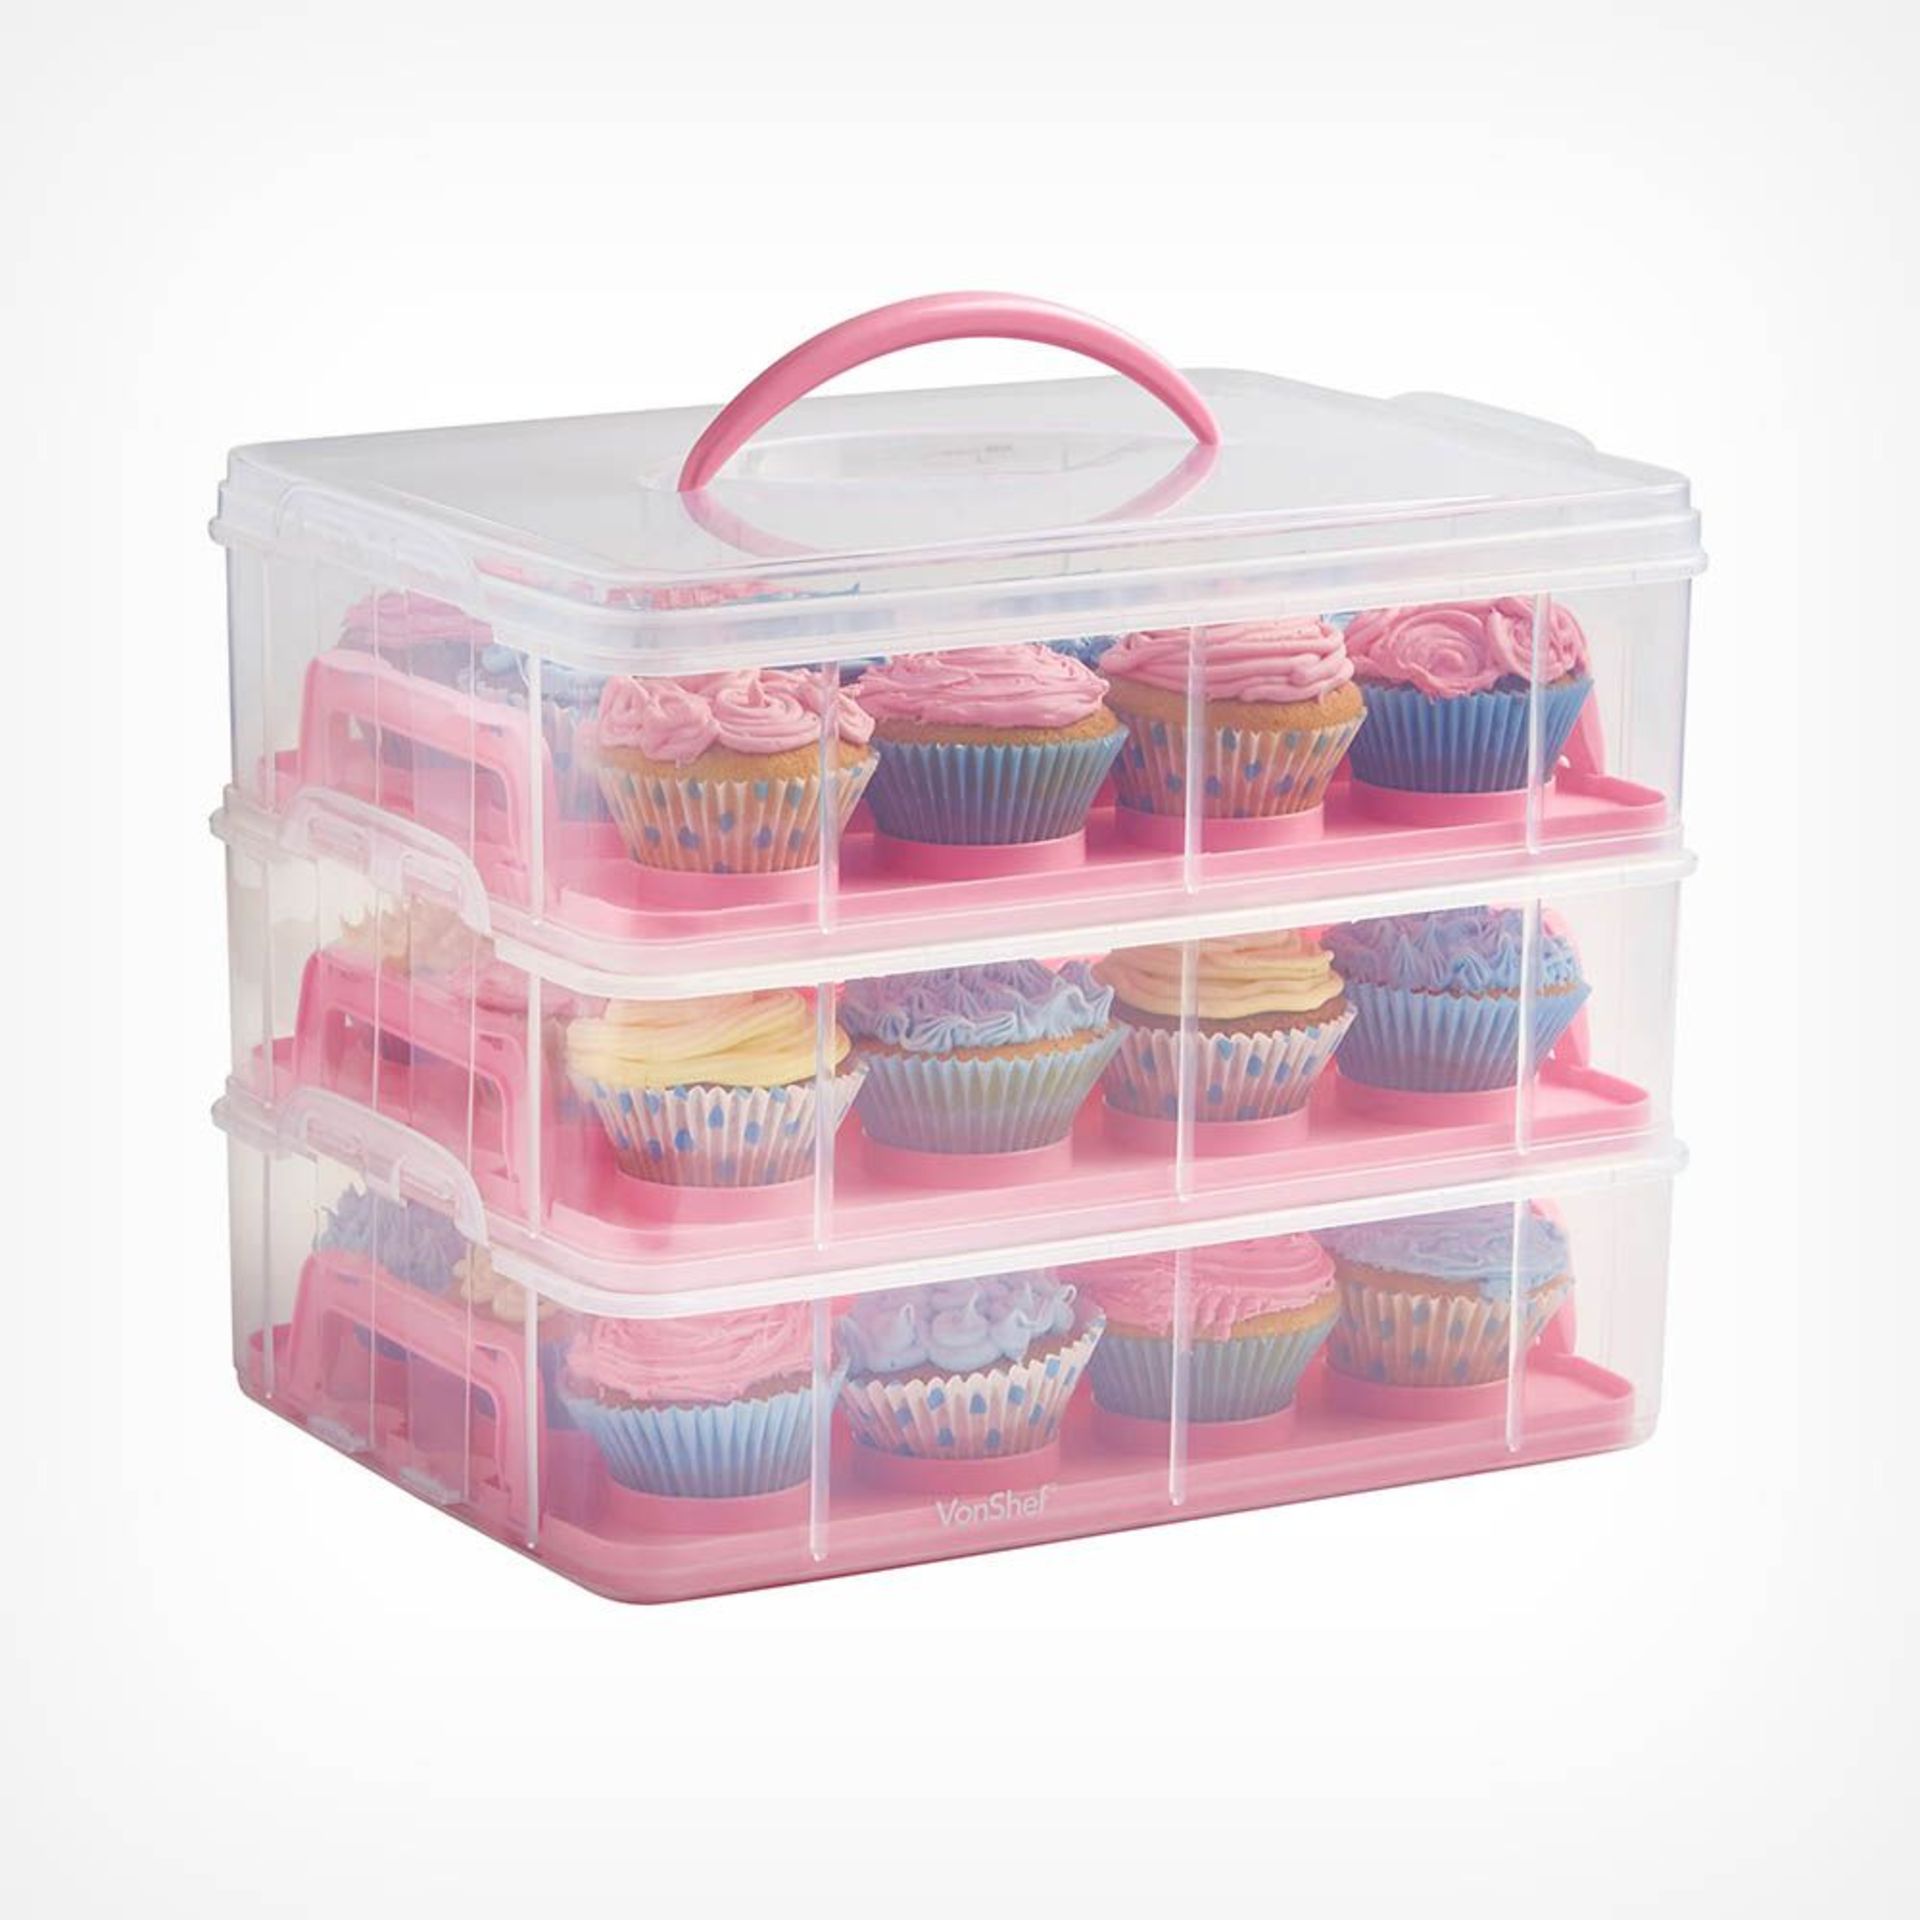 3 Tier Cupcake Carrier Pink. With this extremely handy carrier, you can store and transport up to 36